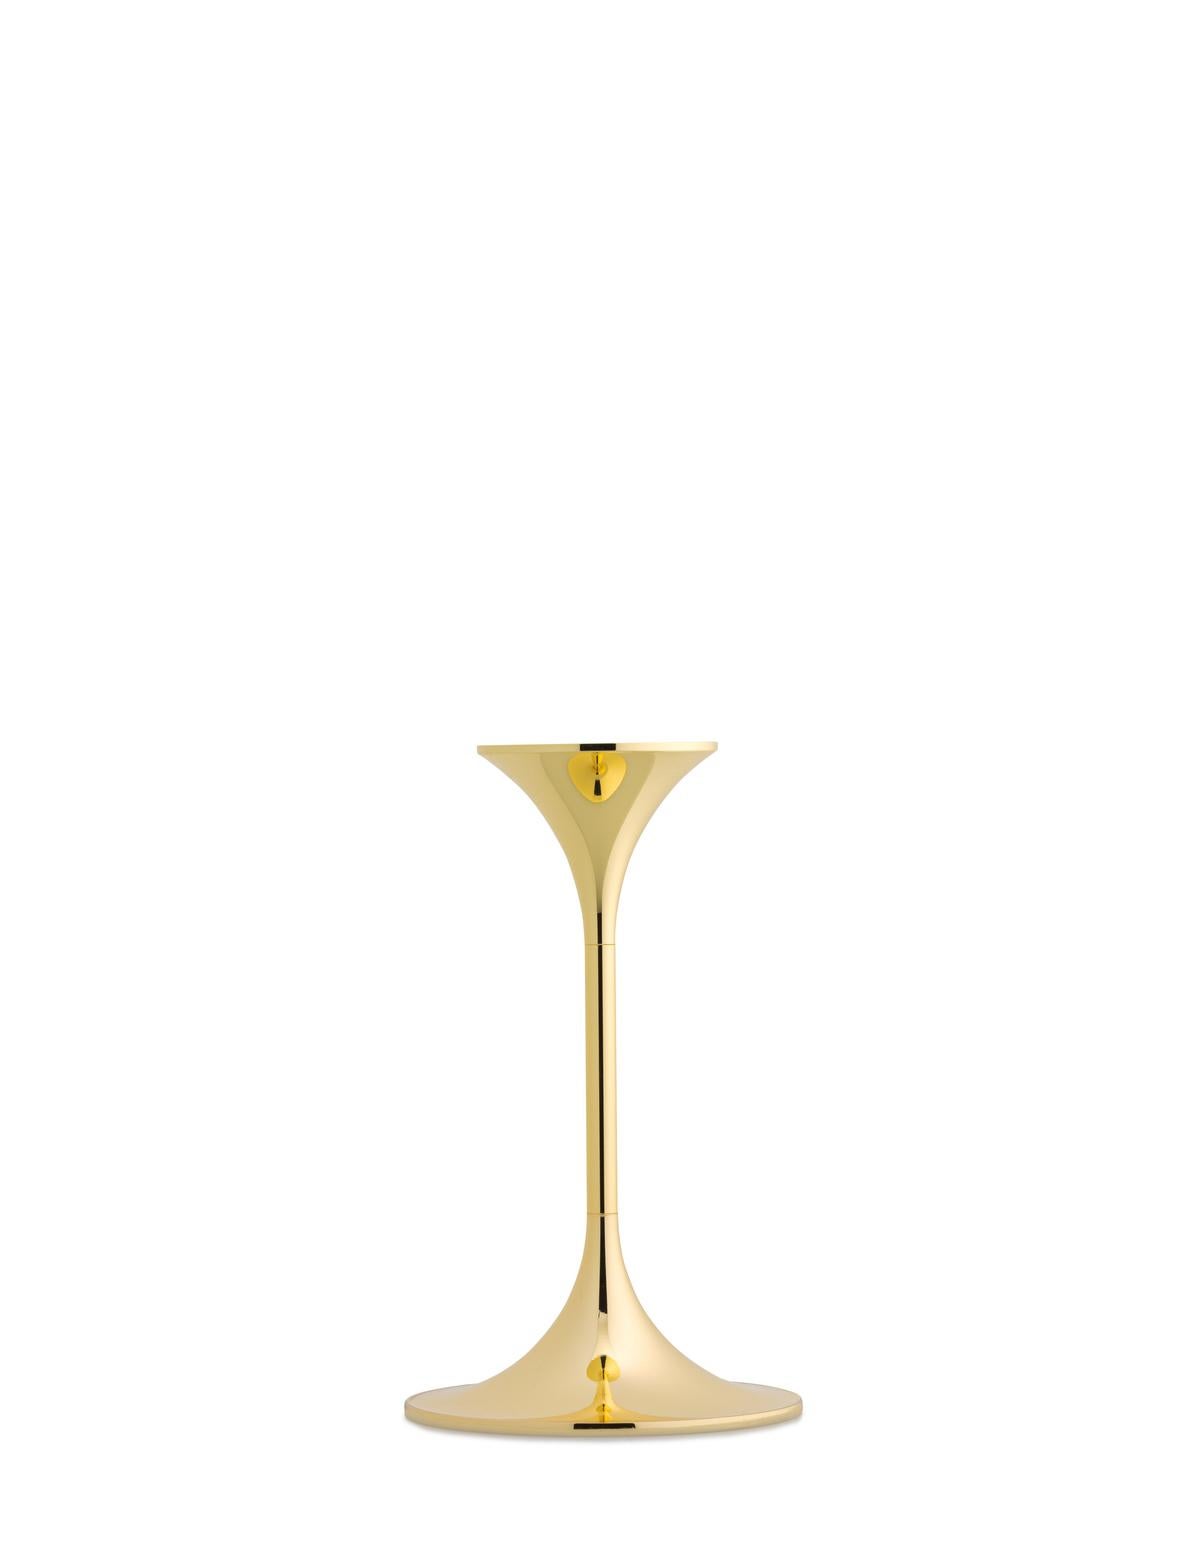 Set of Four Max Brüel 'Jazz' Candleholders, Steel with Brass Plating by Karakter For Sale 3